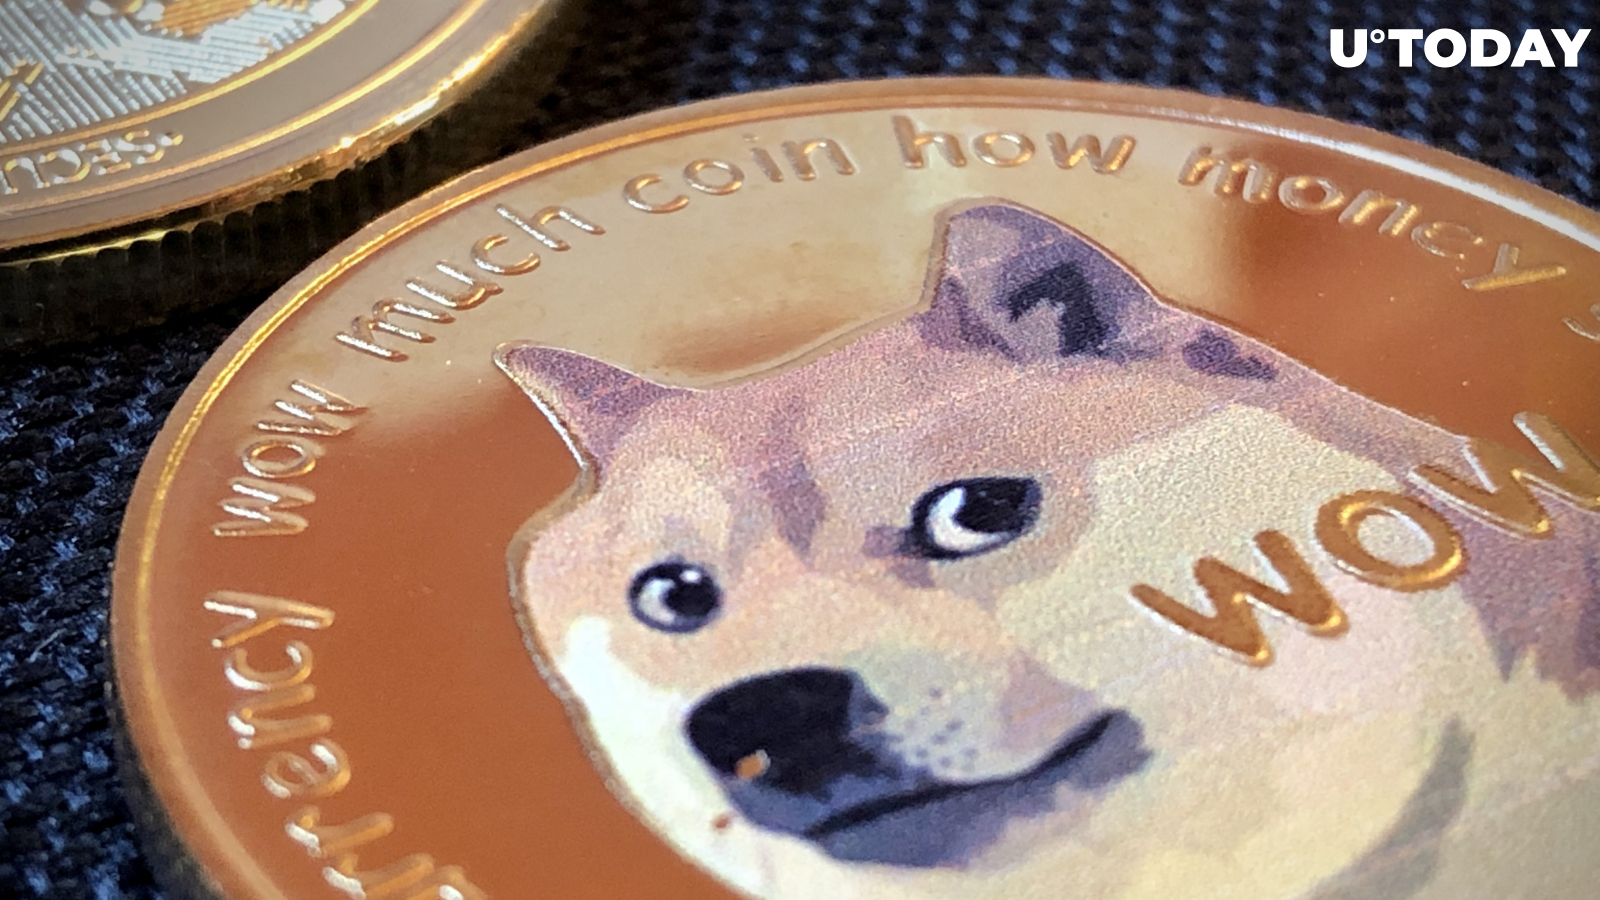 Original Doge Meme to Be Auctioned as NFT